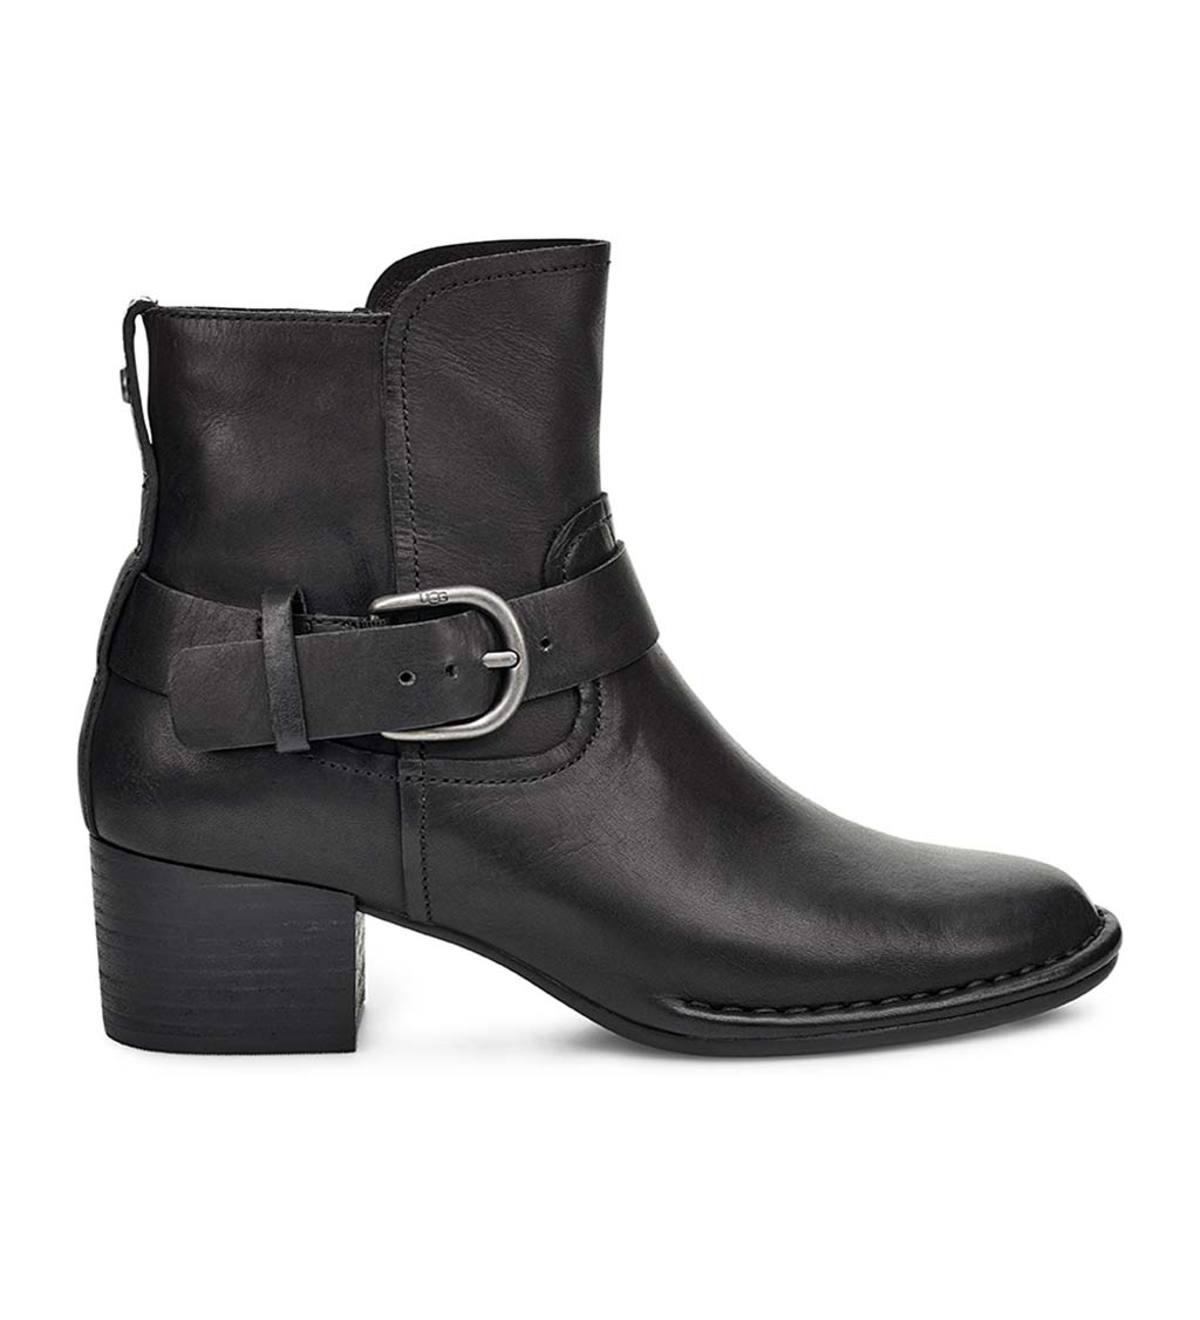 UGG Atwood Women's Short Boot - Black - Size 6 | Plow & Hearth